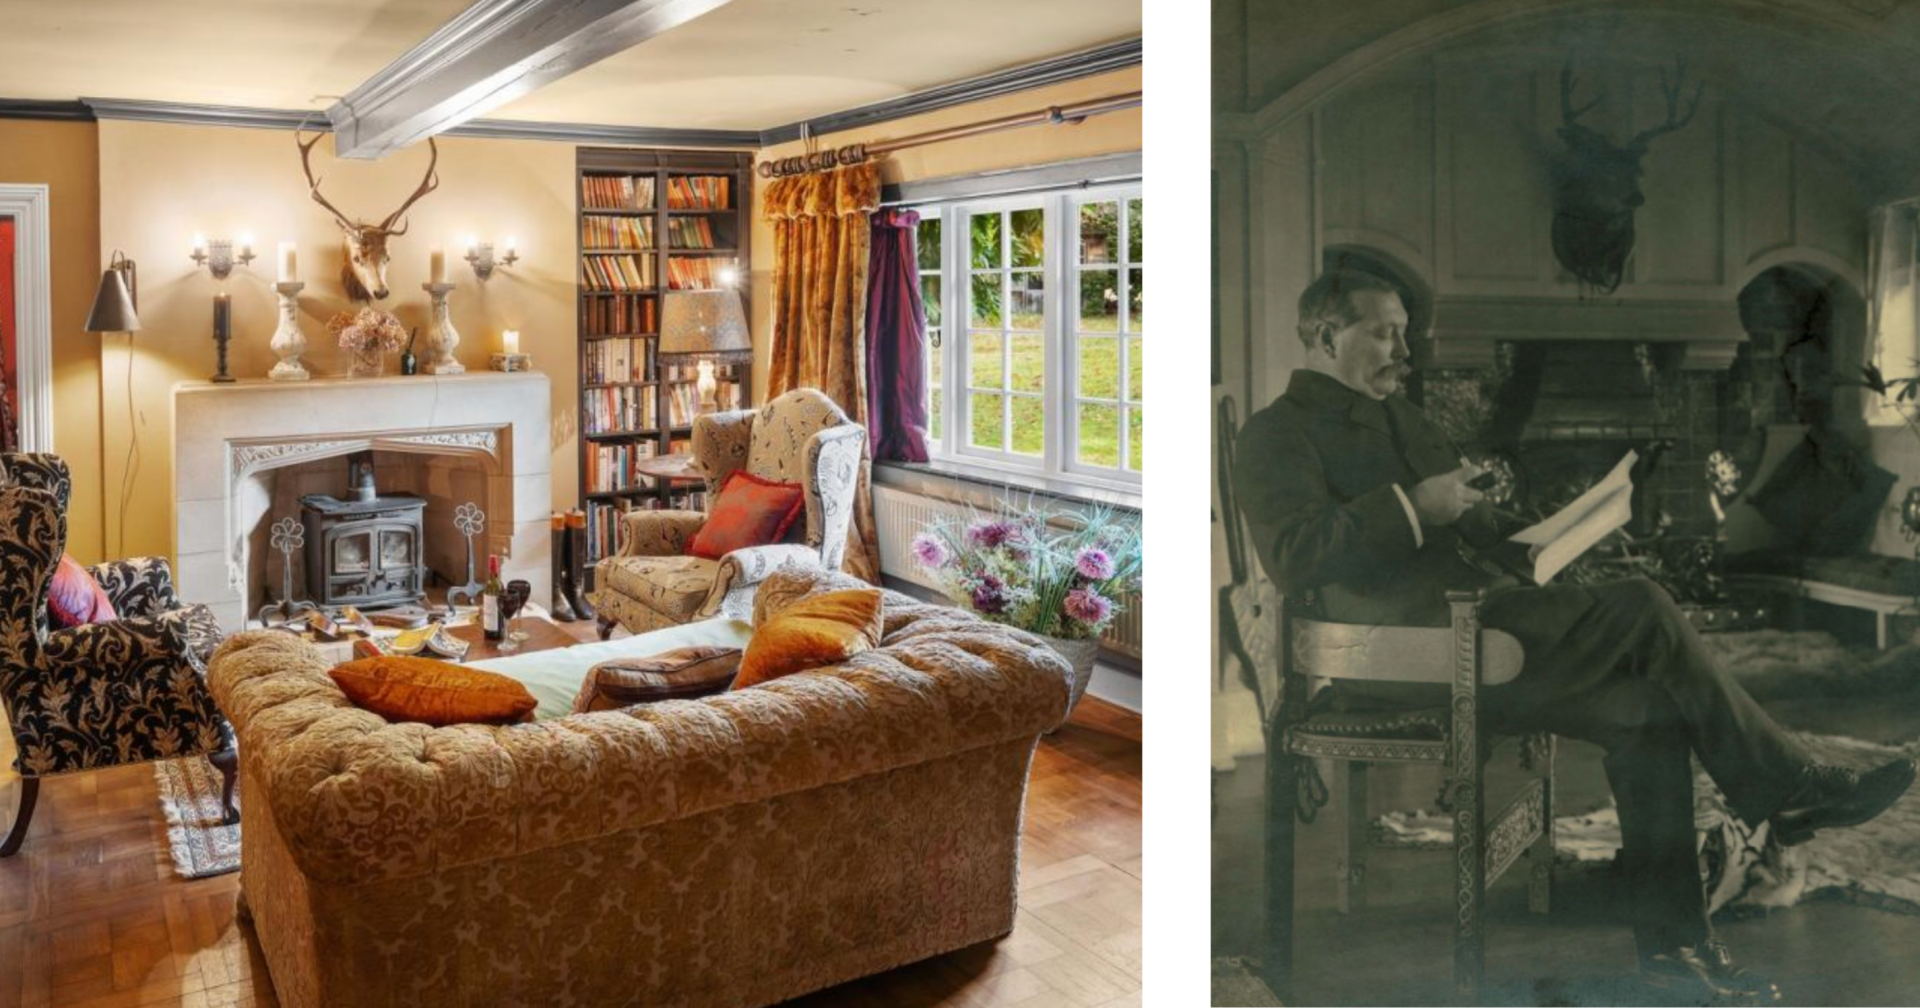 For Sale: this idyllic English cottage was once Sherlock Holmes' writer's retreat